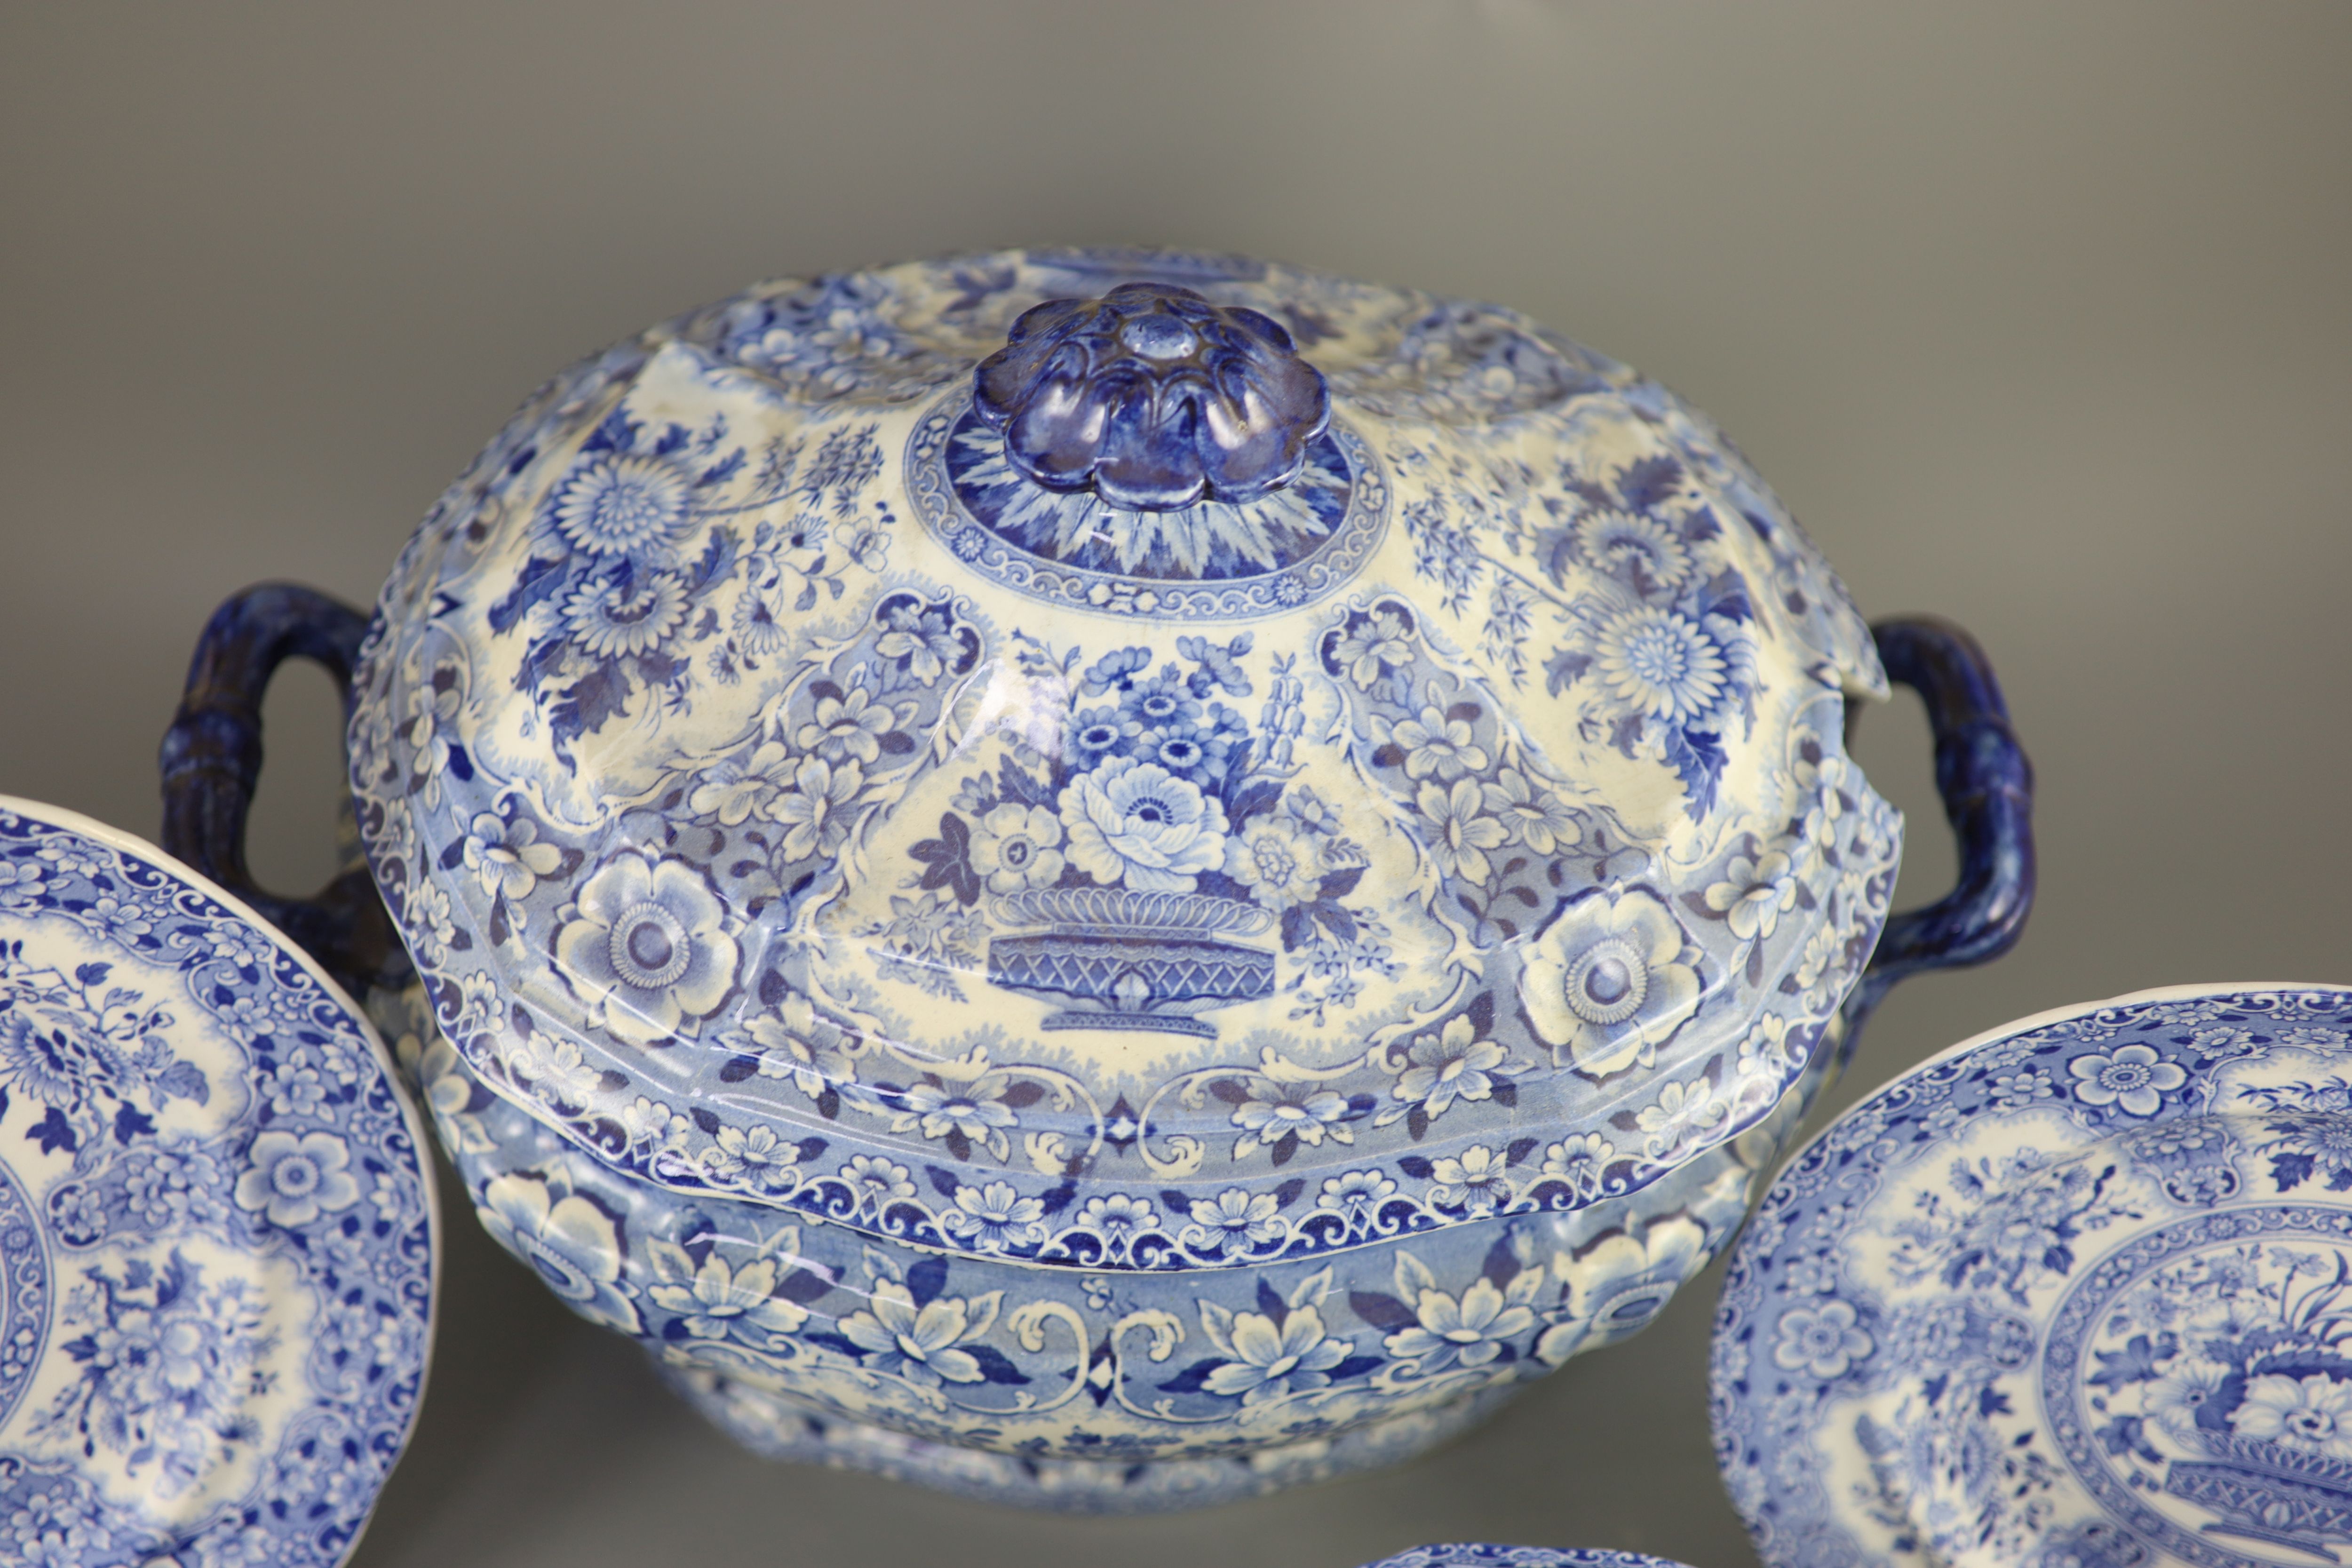 An extensive Minton filigree pattern blue and white dinner service, c.1830,